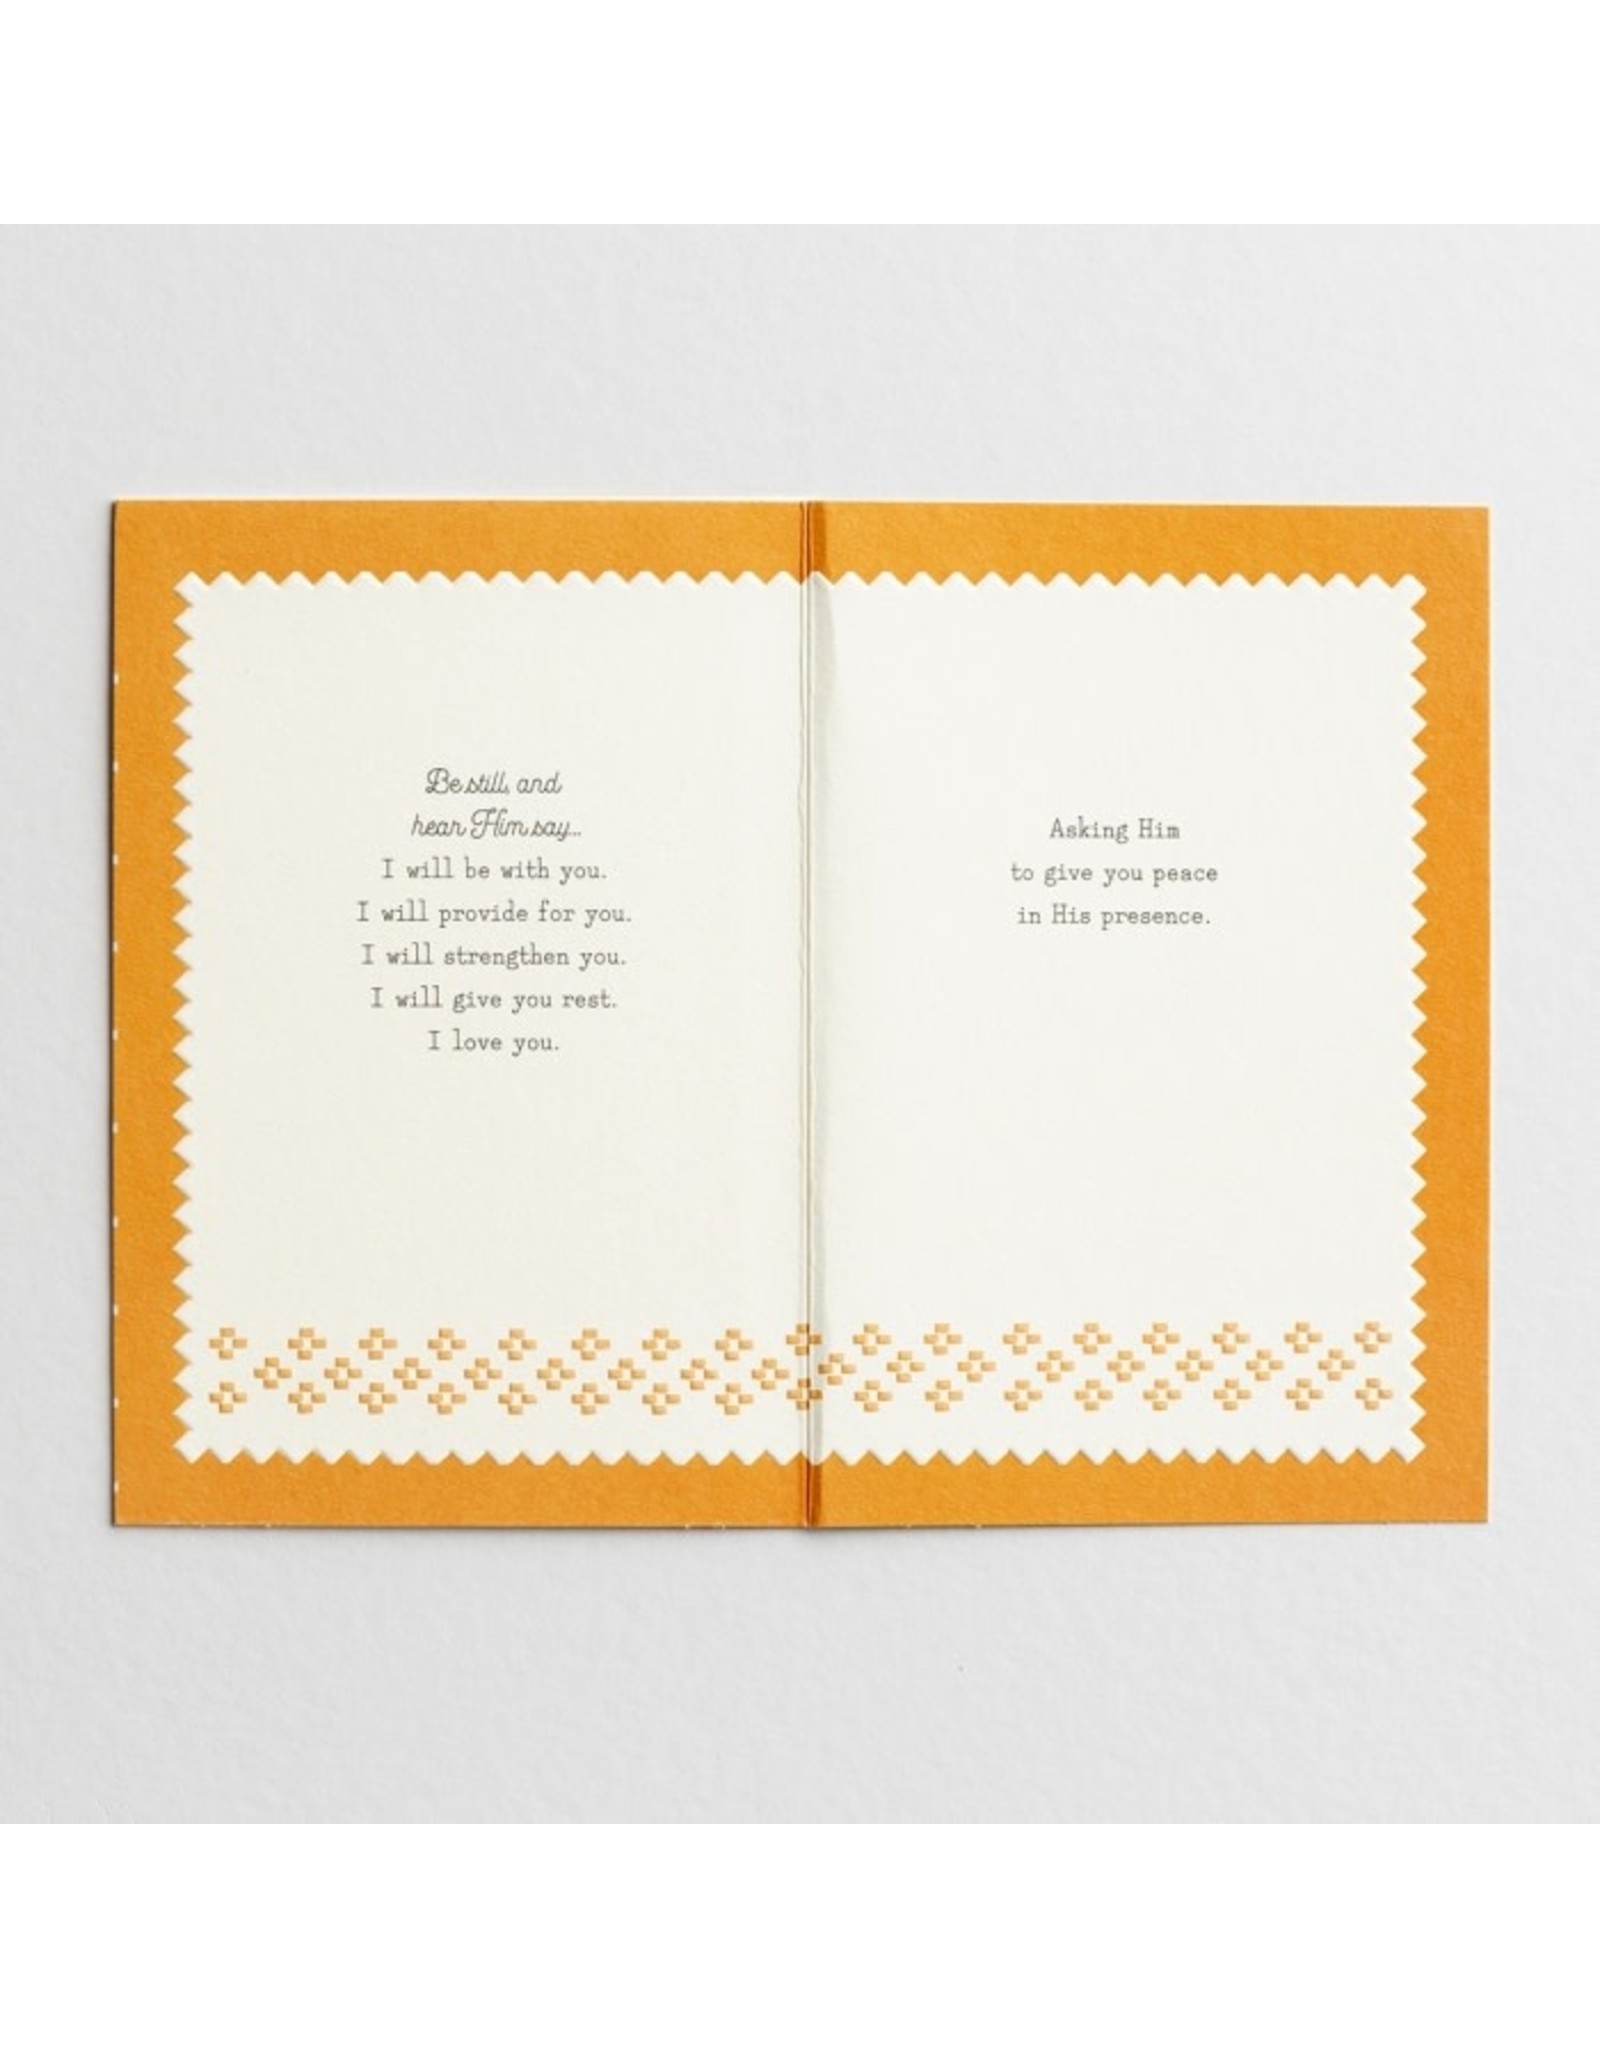 Blessings for Your Heart Encouragement Card - Be Still